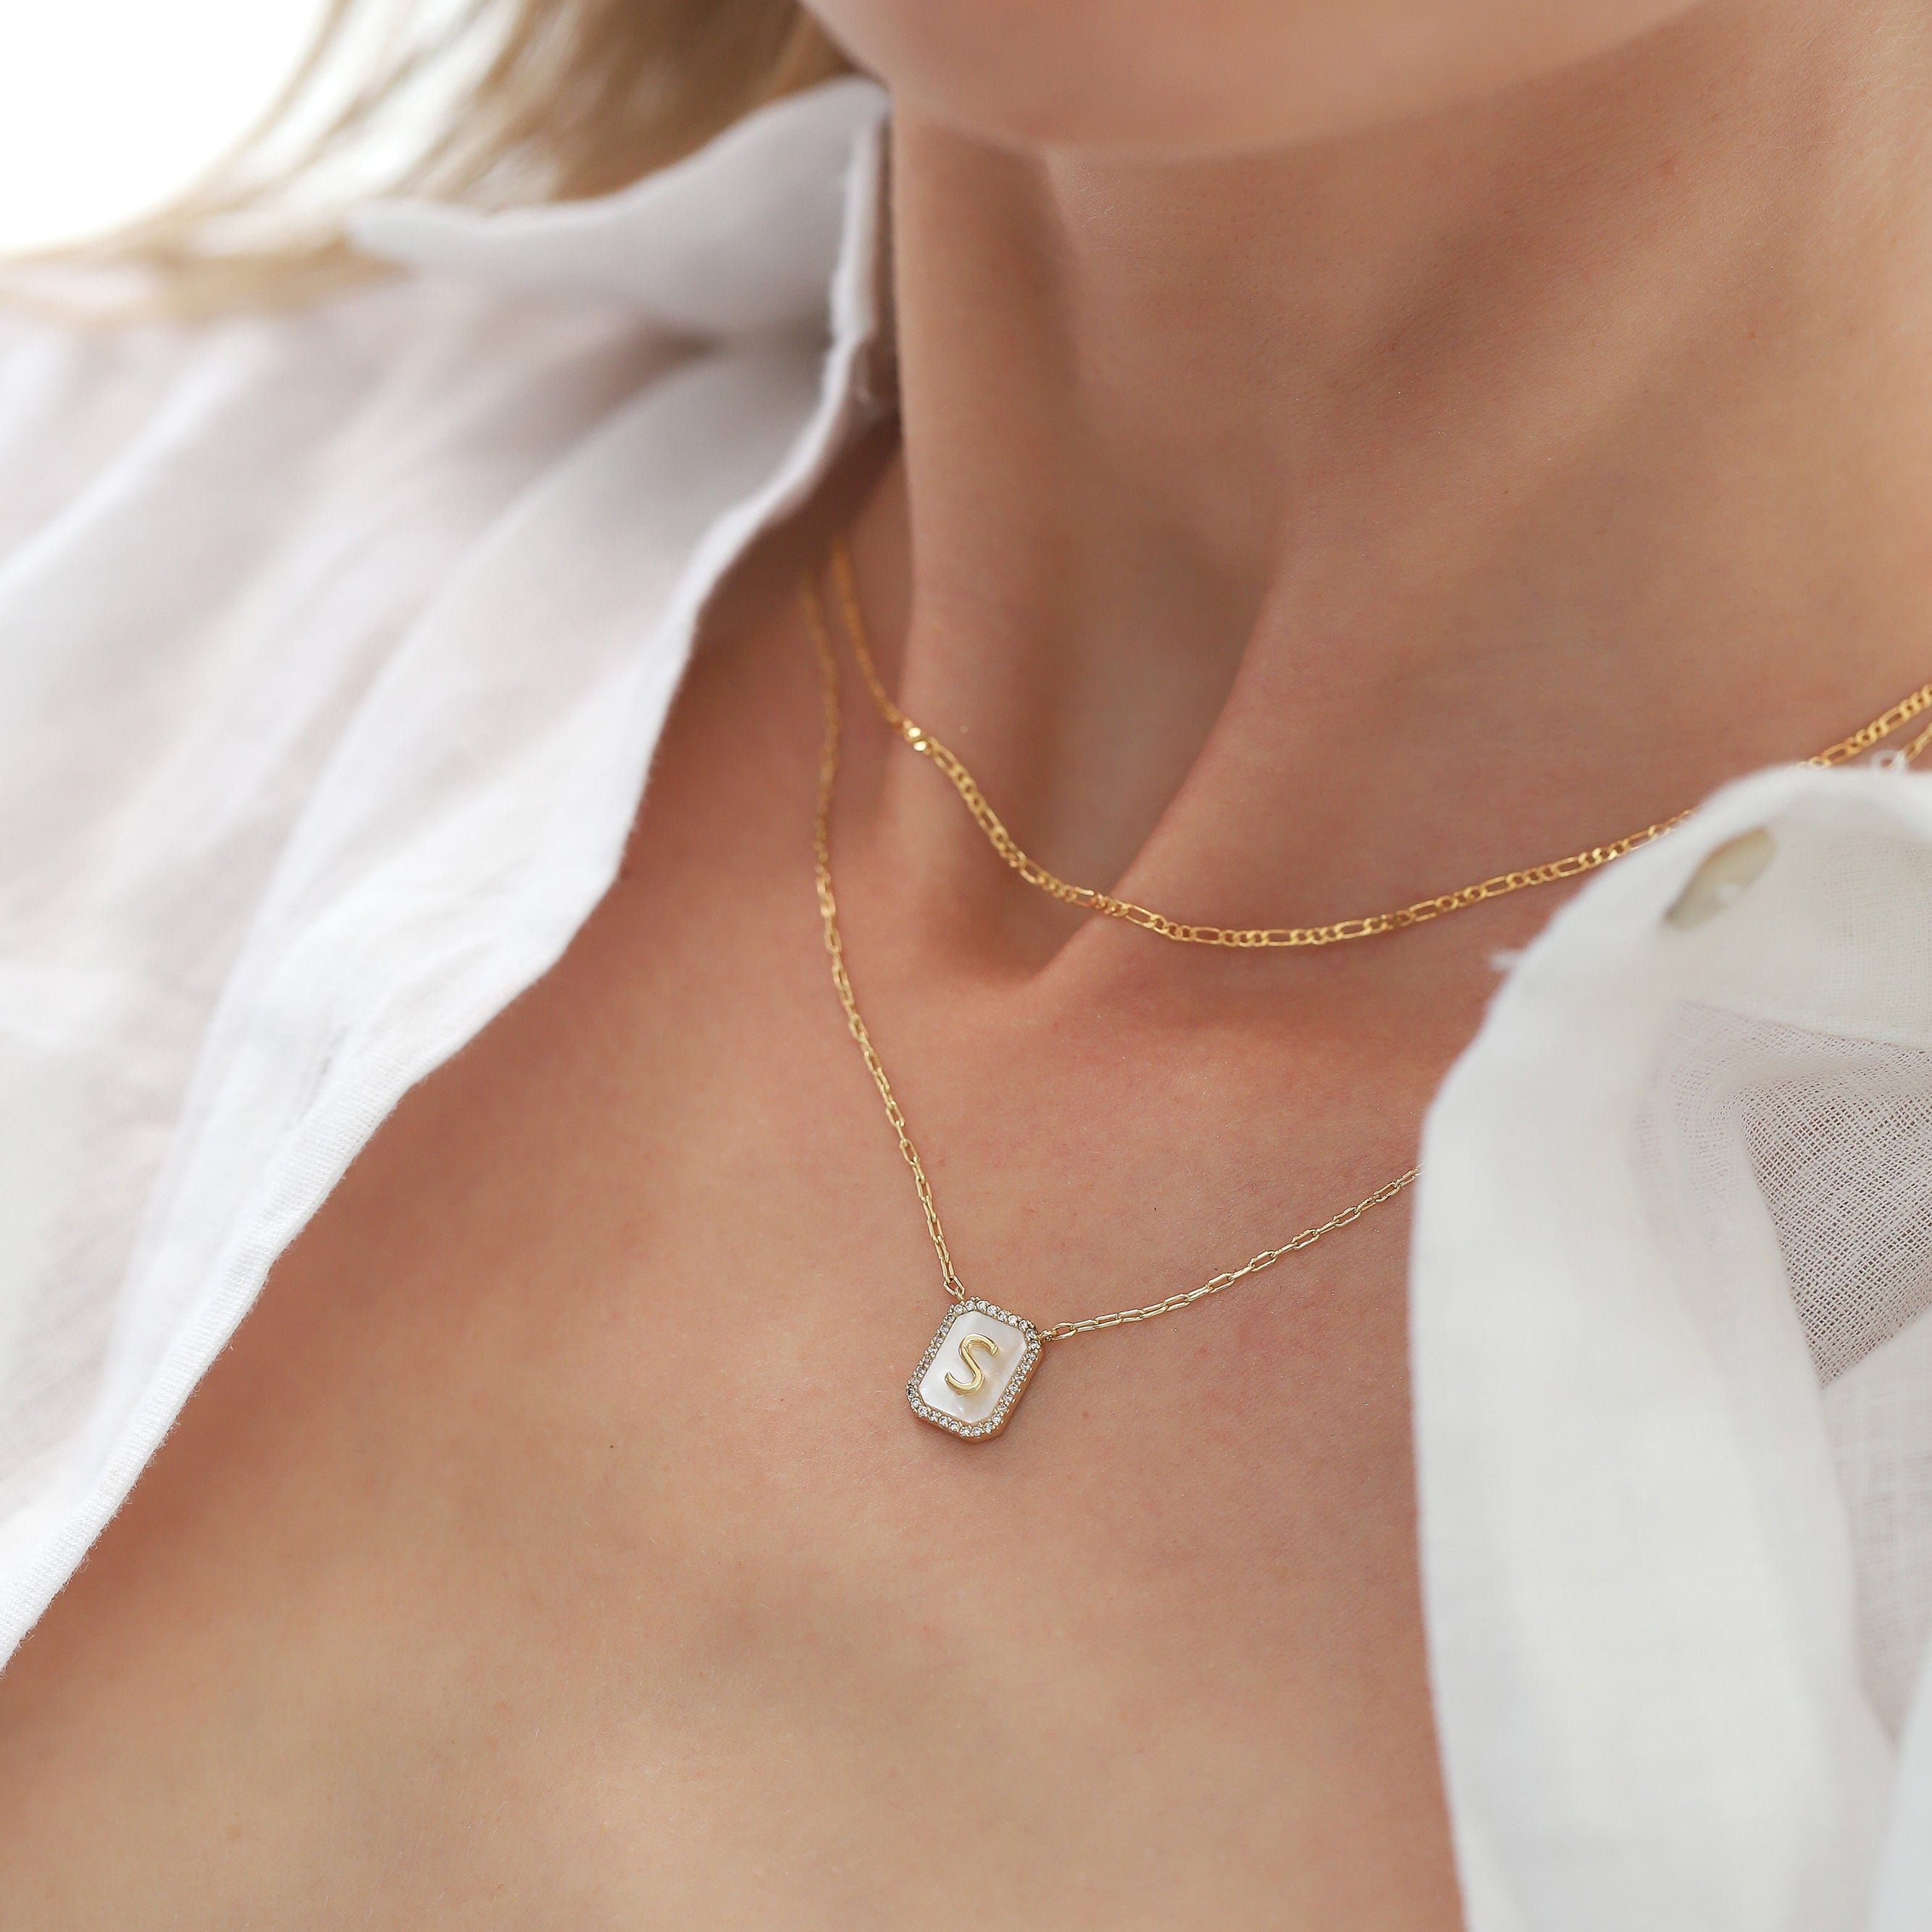 TAI JEWELRY Necklace Mother Of Pearl Monogram Necklace